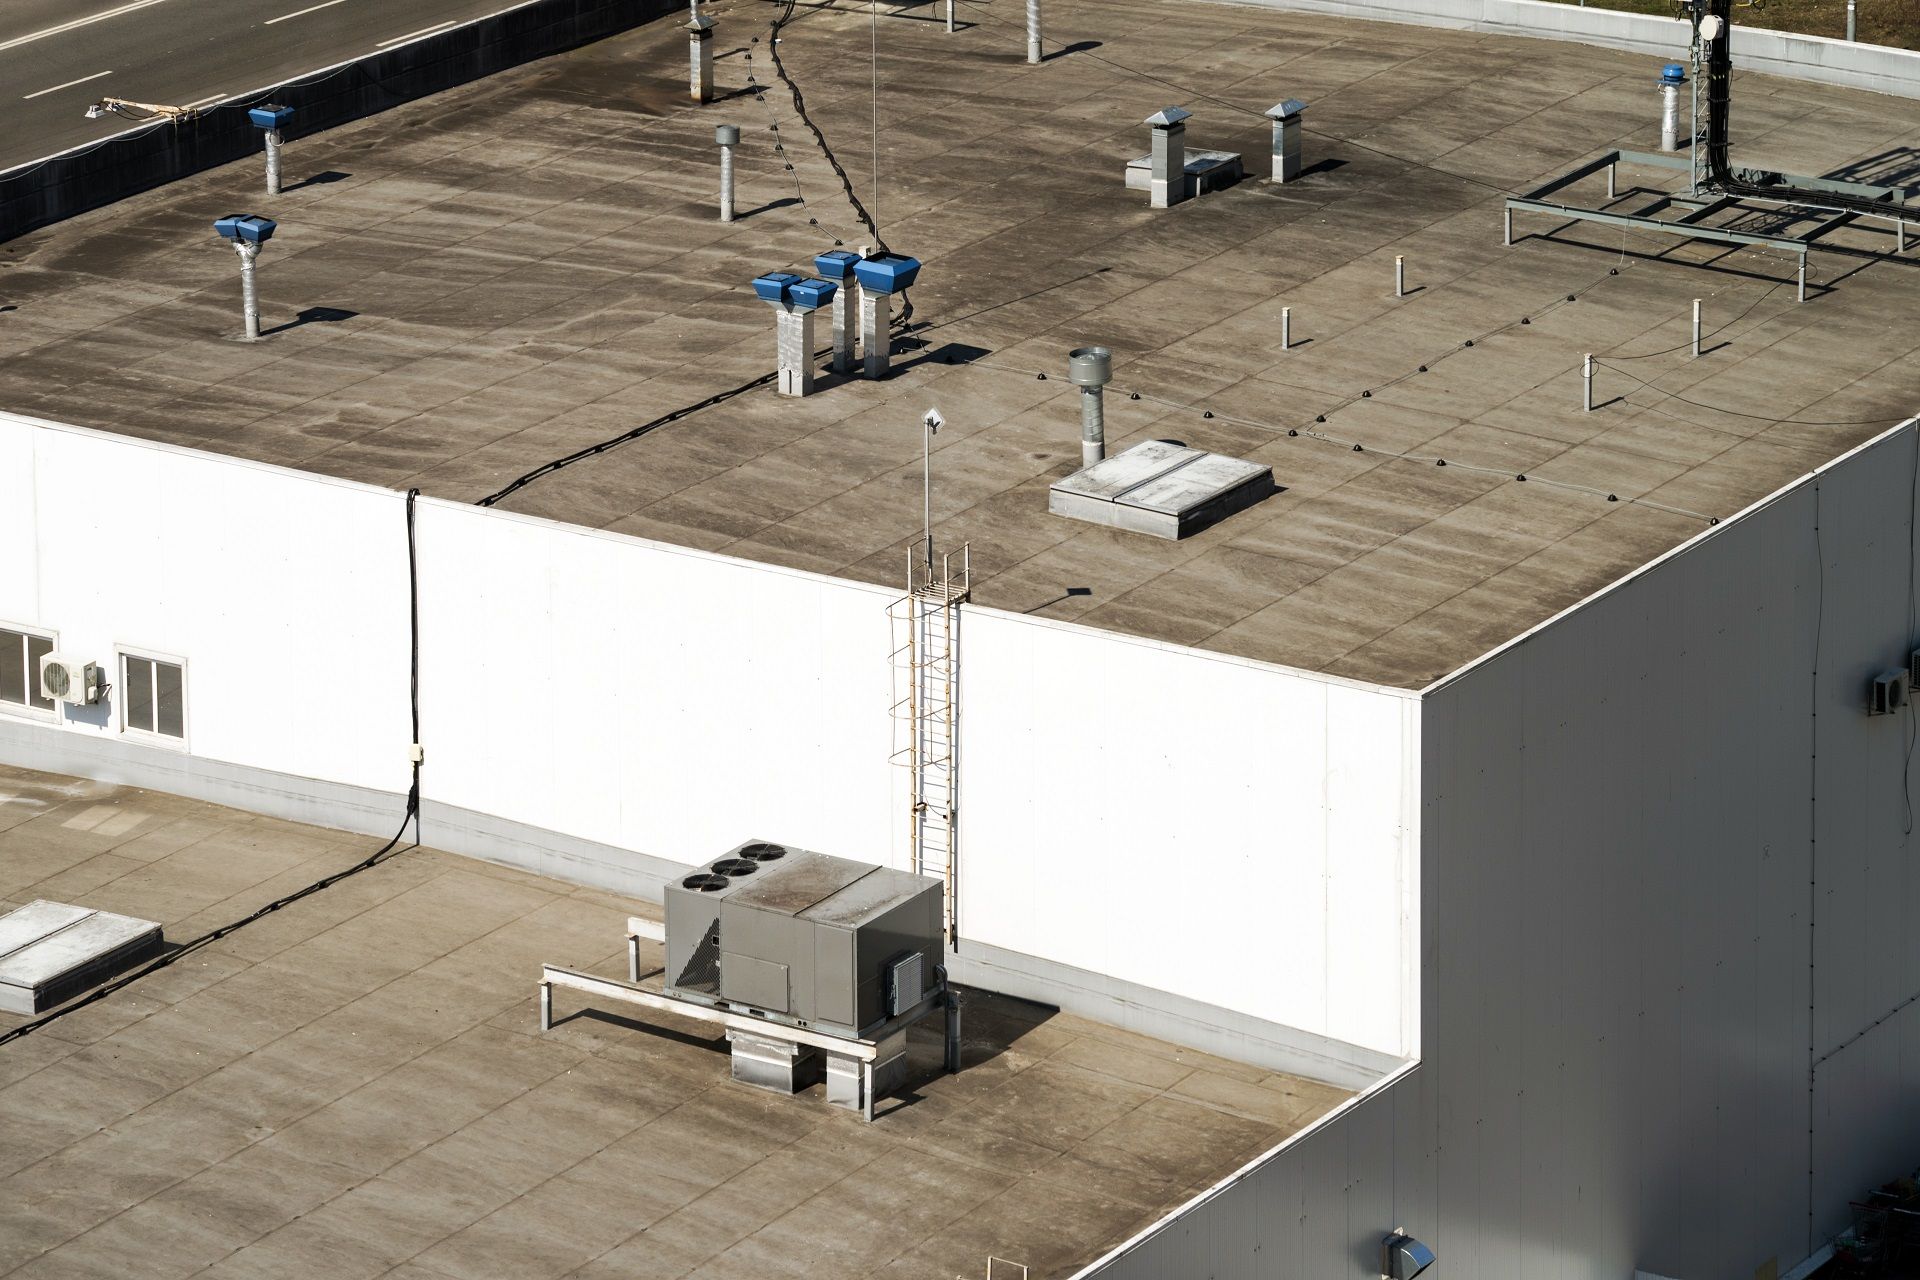 Commercial roof inspection checklist